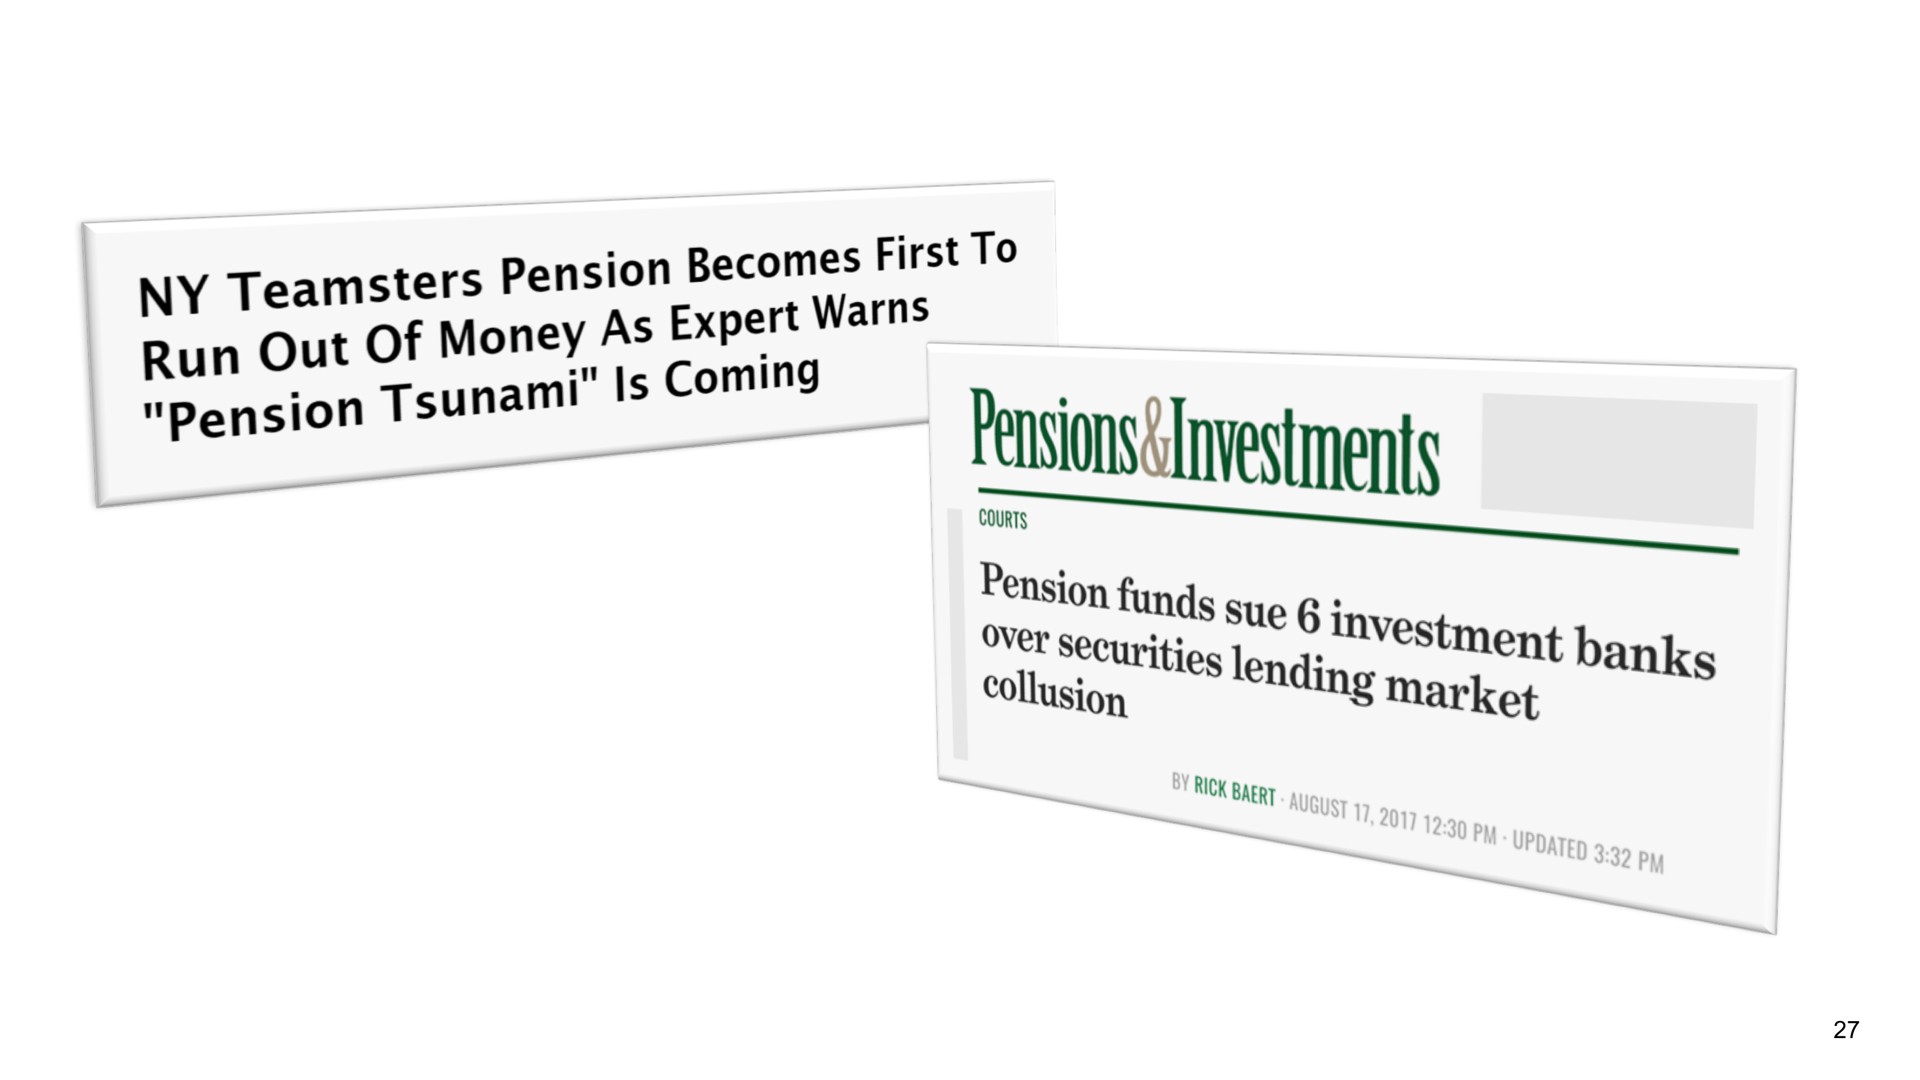 a pen pensions investments | Overstock